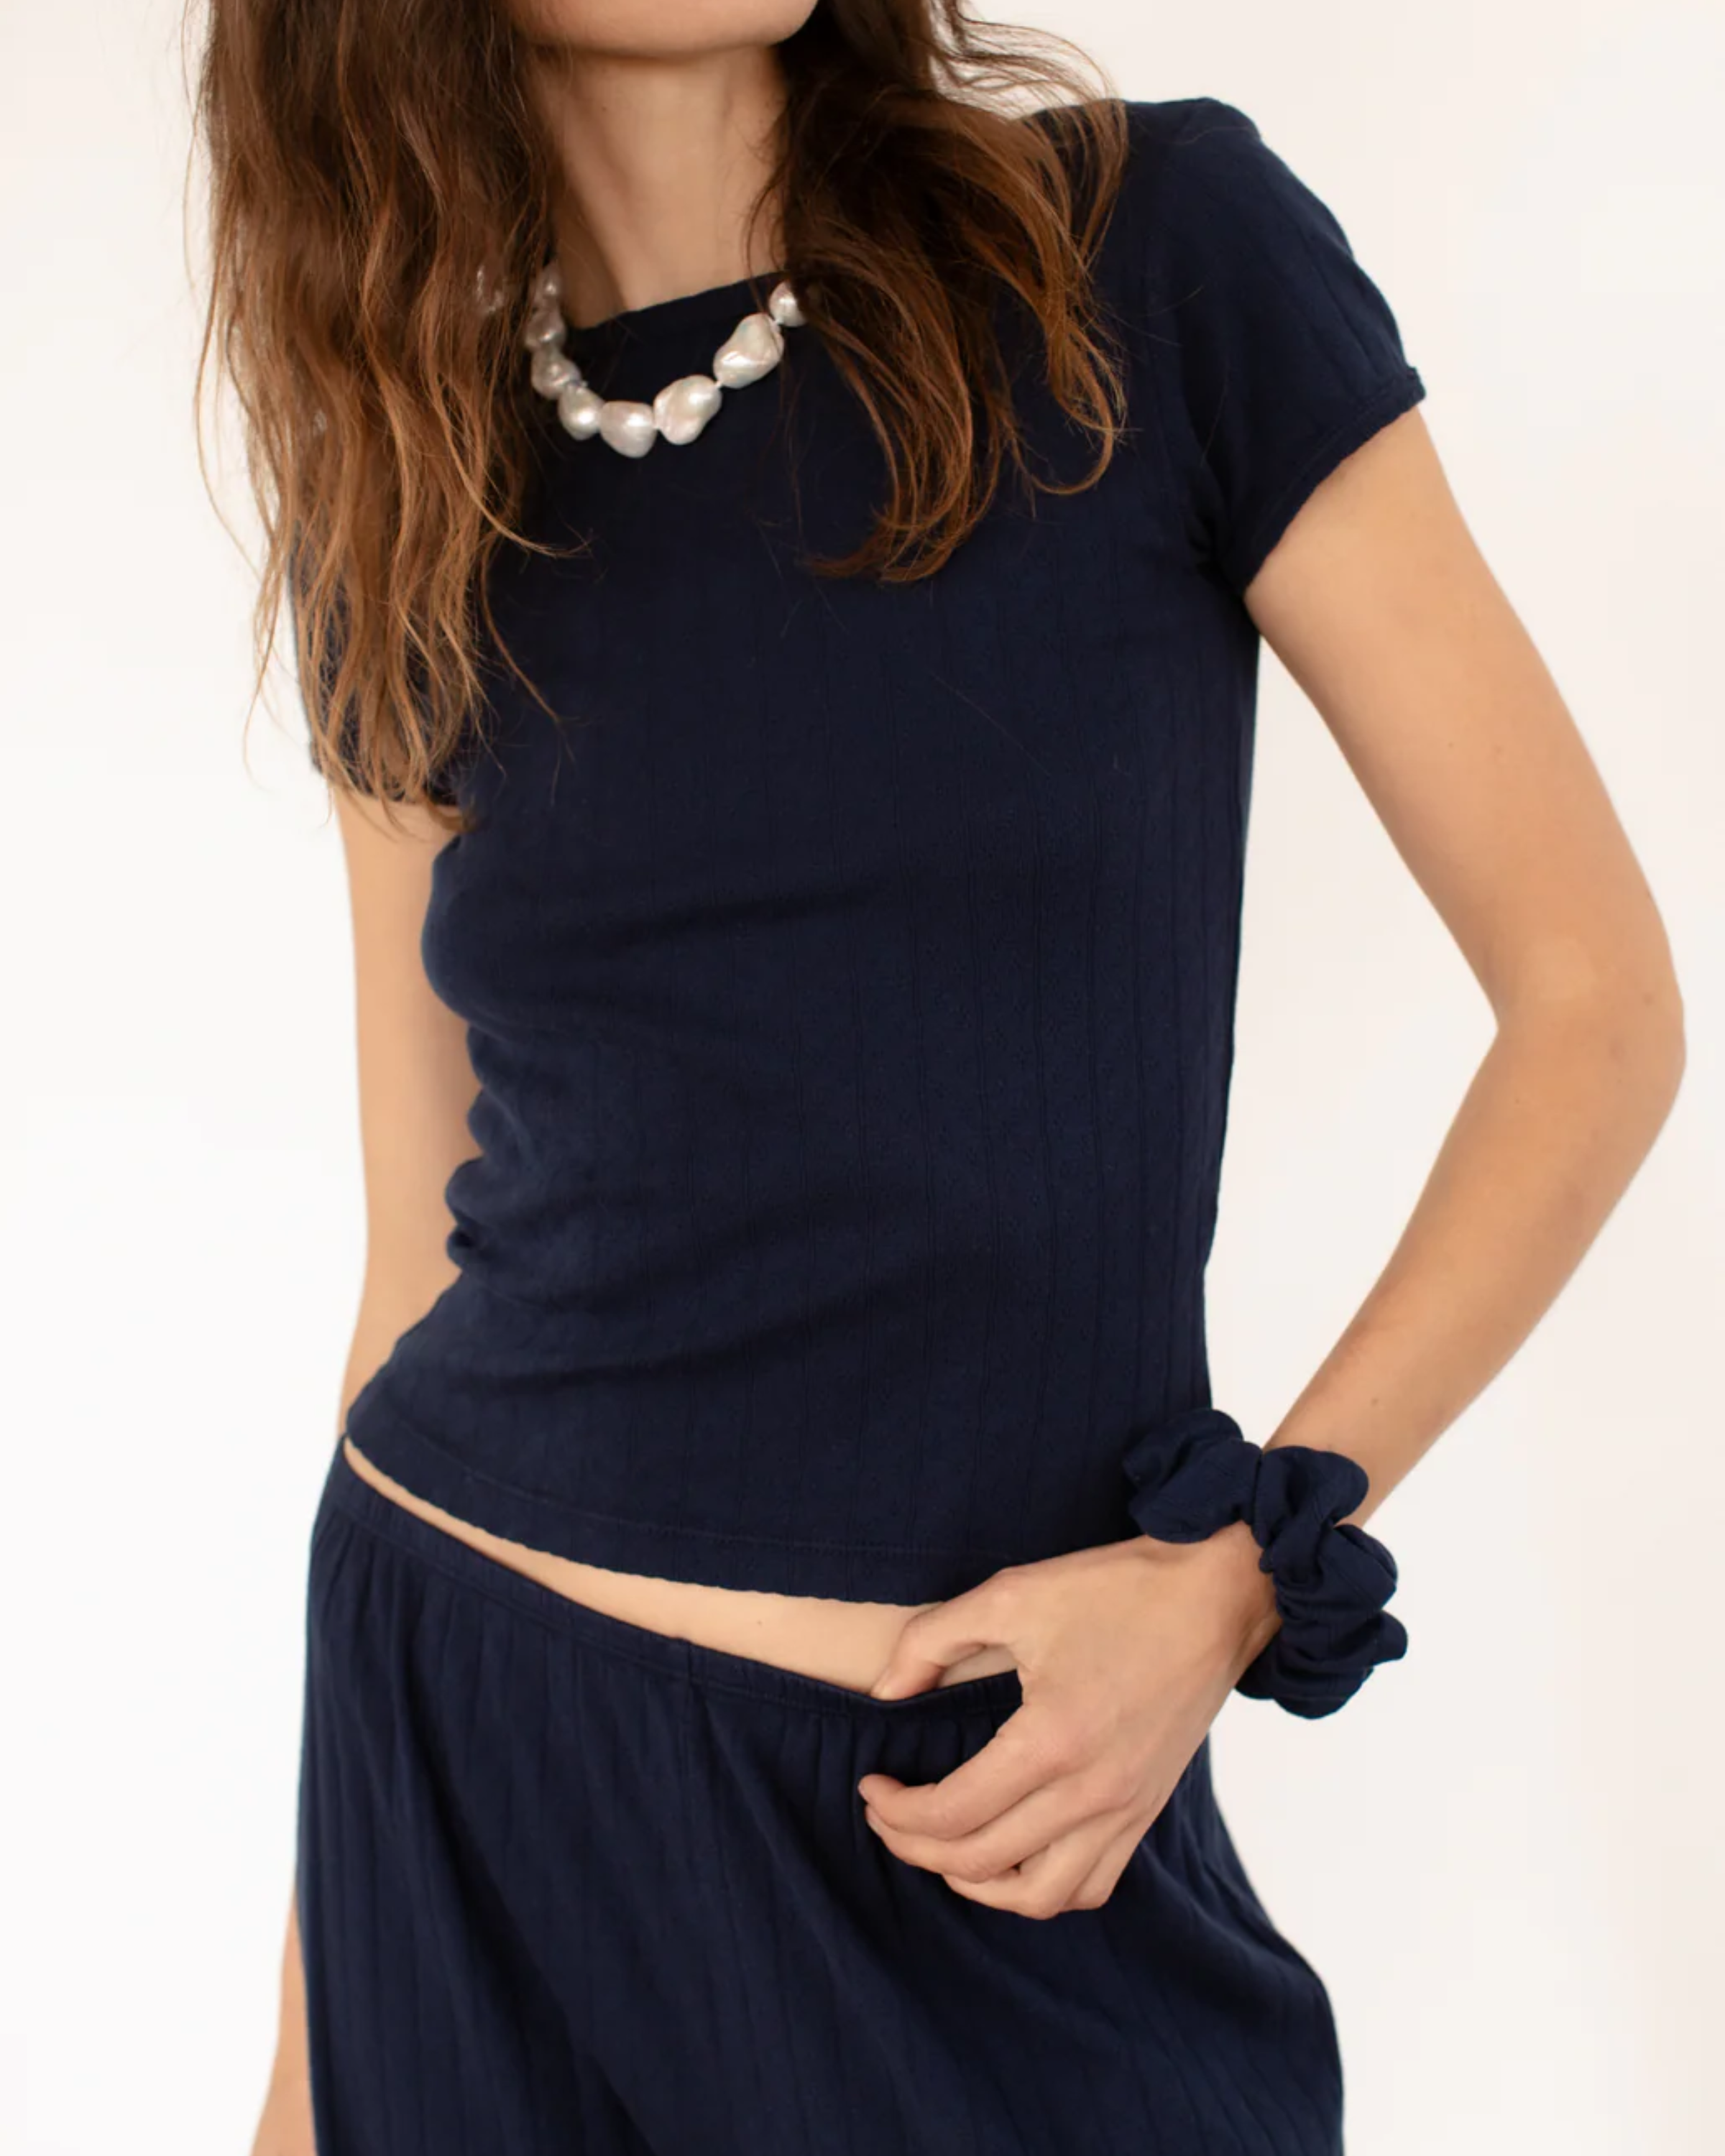 Donni Pointelle Baby Tee in Navy